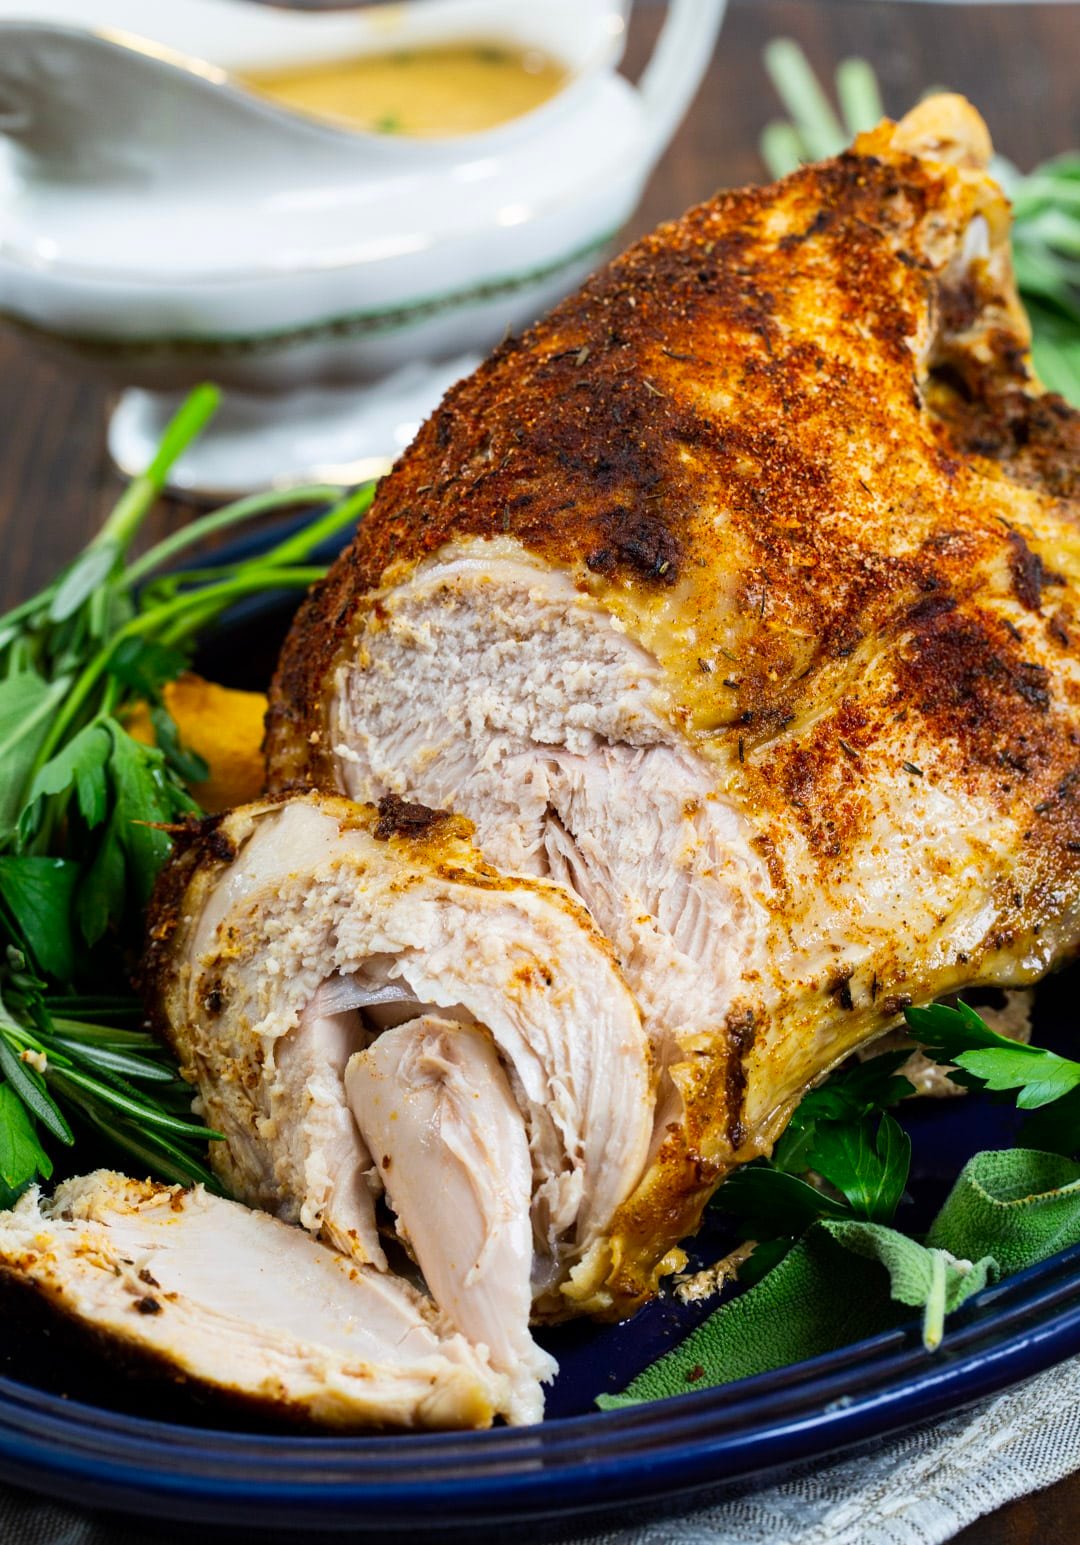 Carved Slow Cooked Turkey Breast.